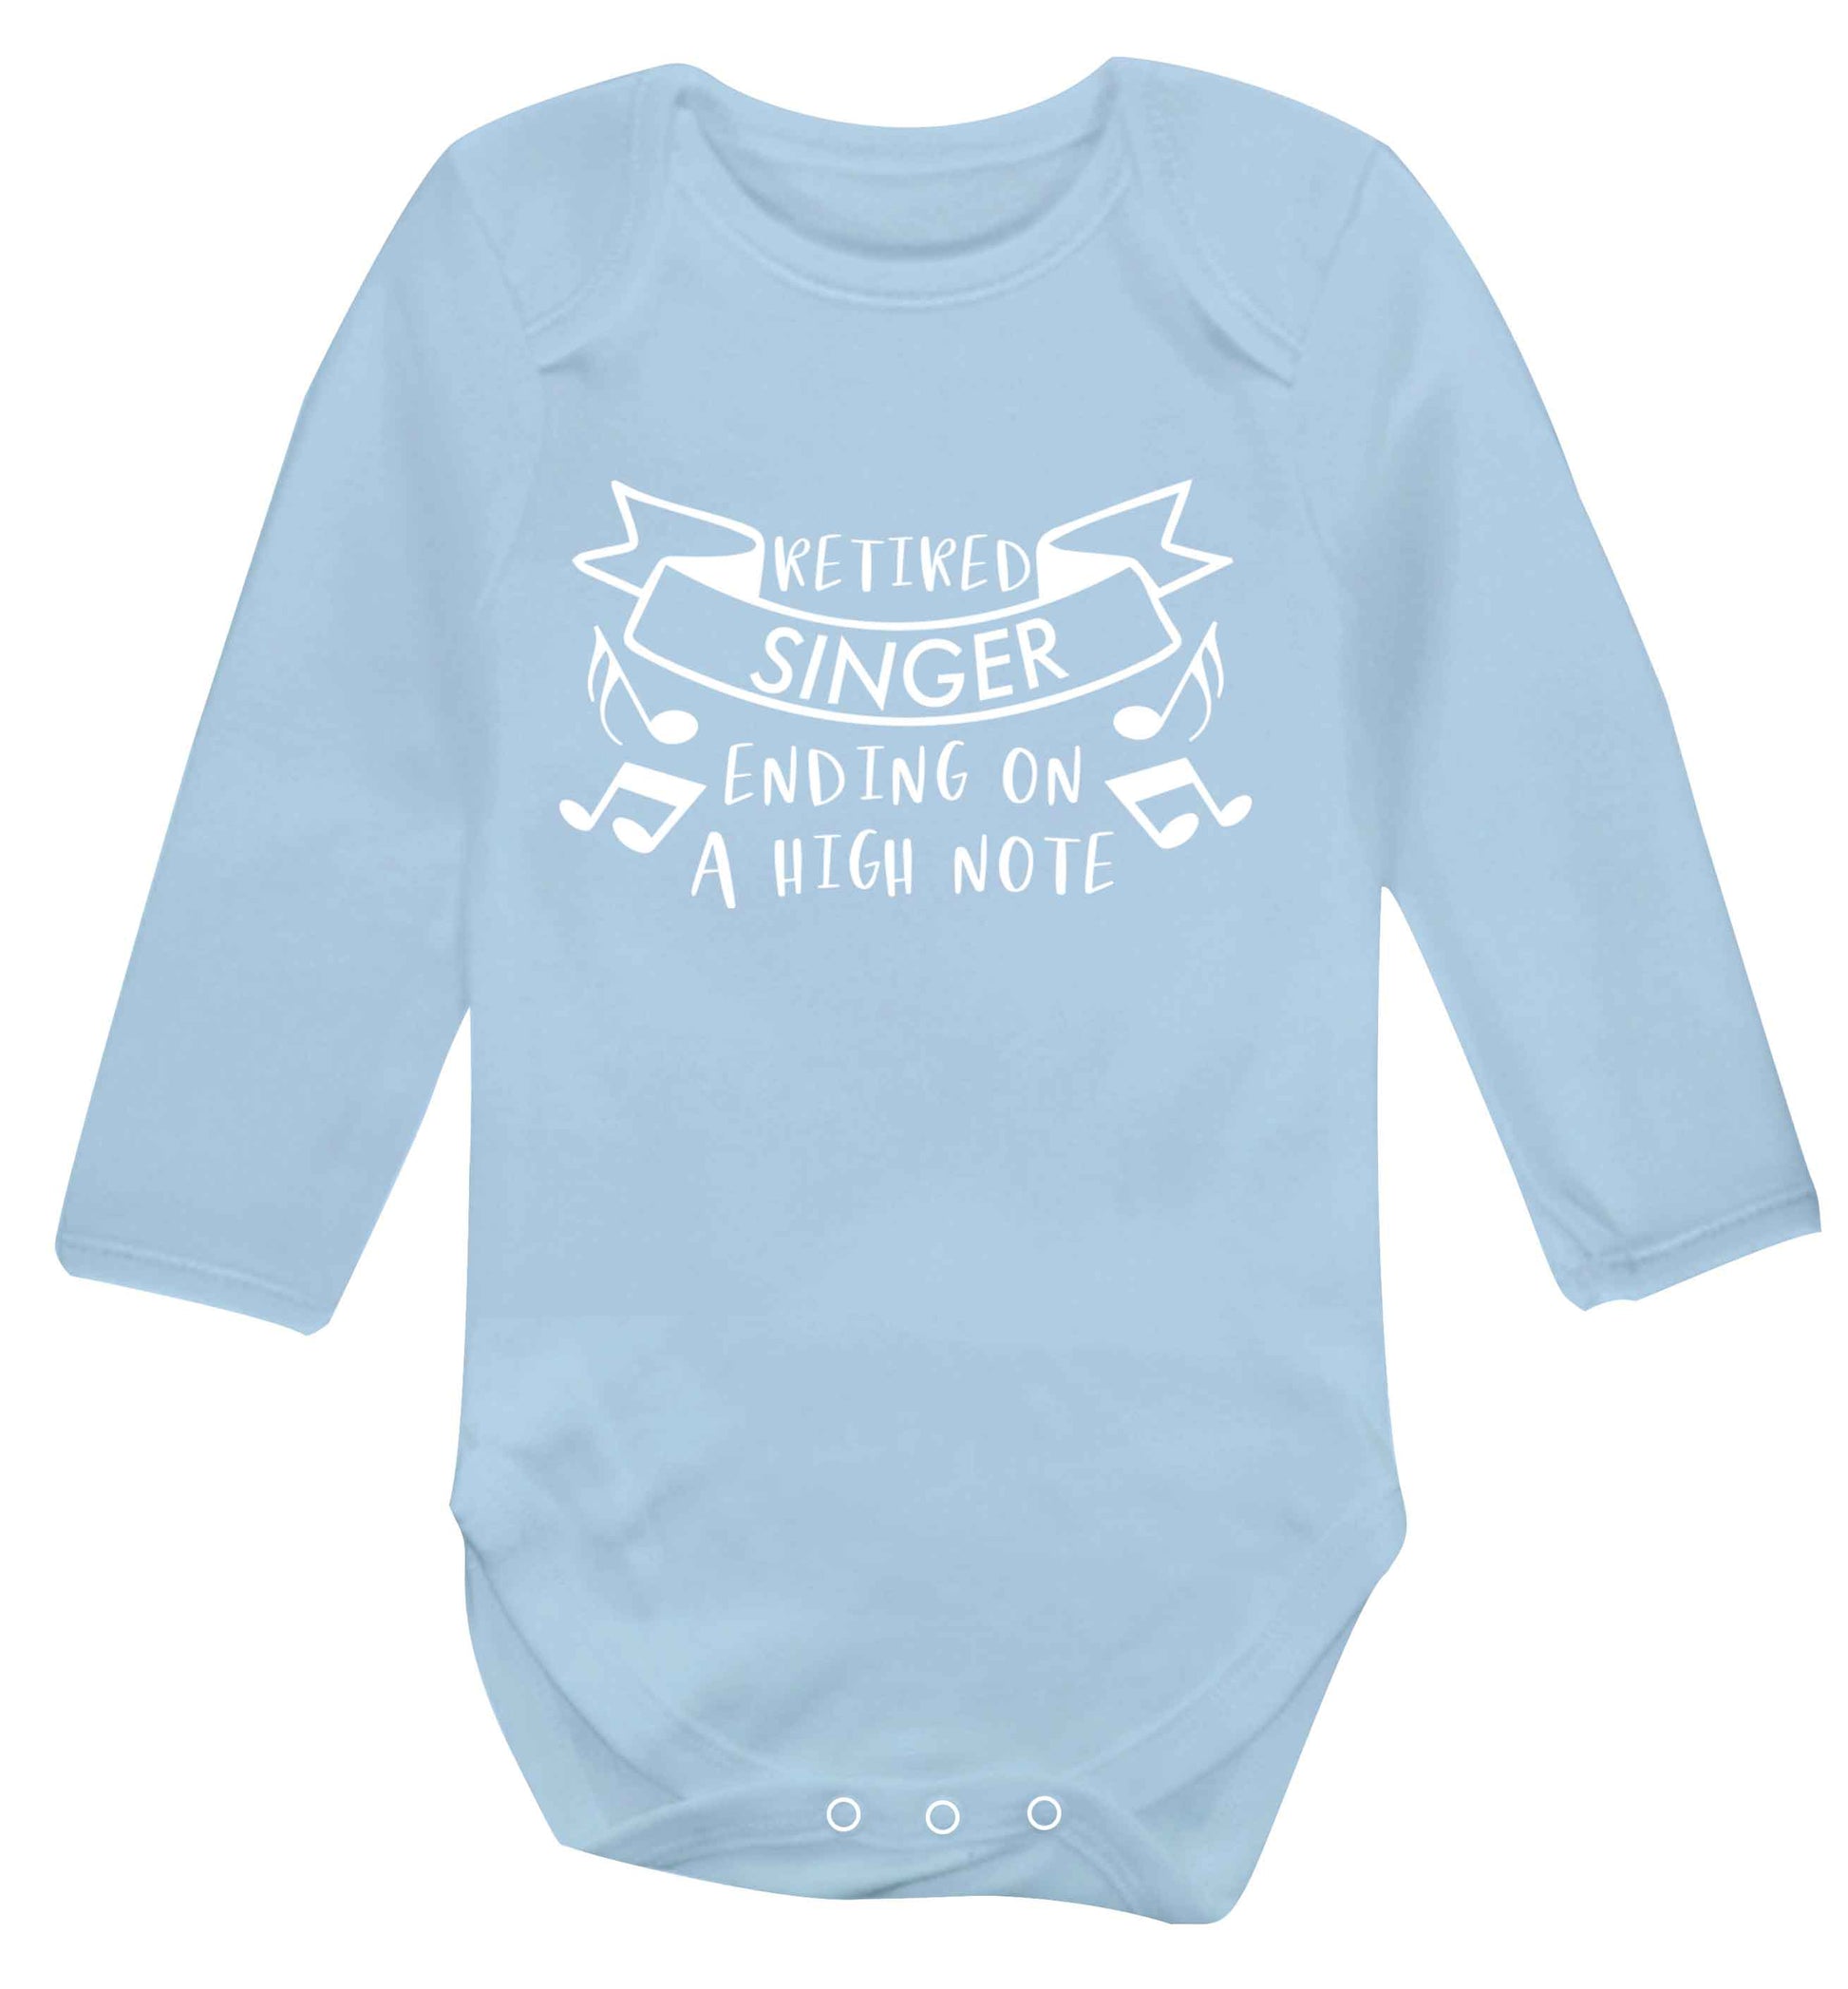 Retired singer ending on a high note Baby Vest long sleeved pale blue 6-12 months